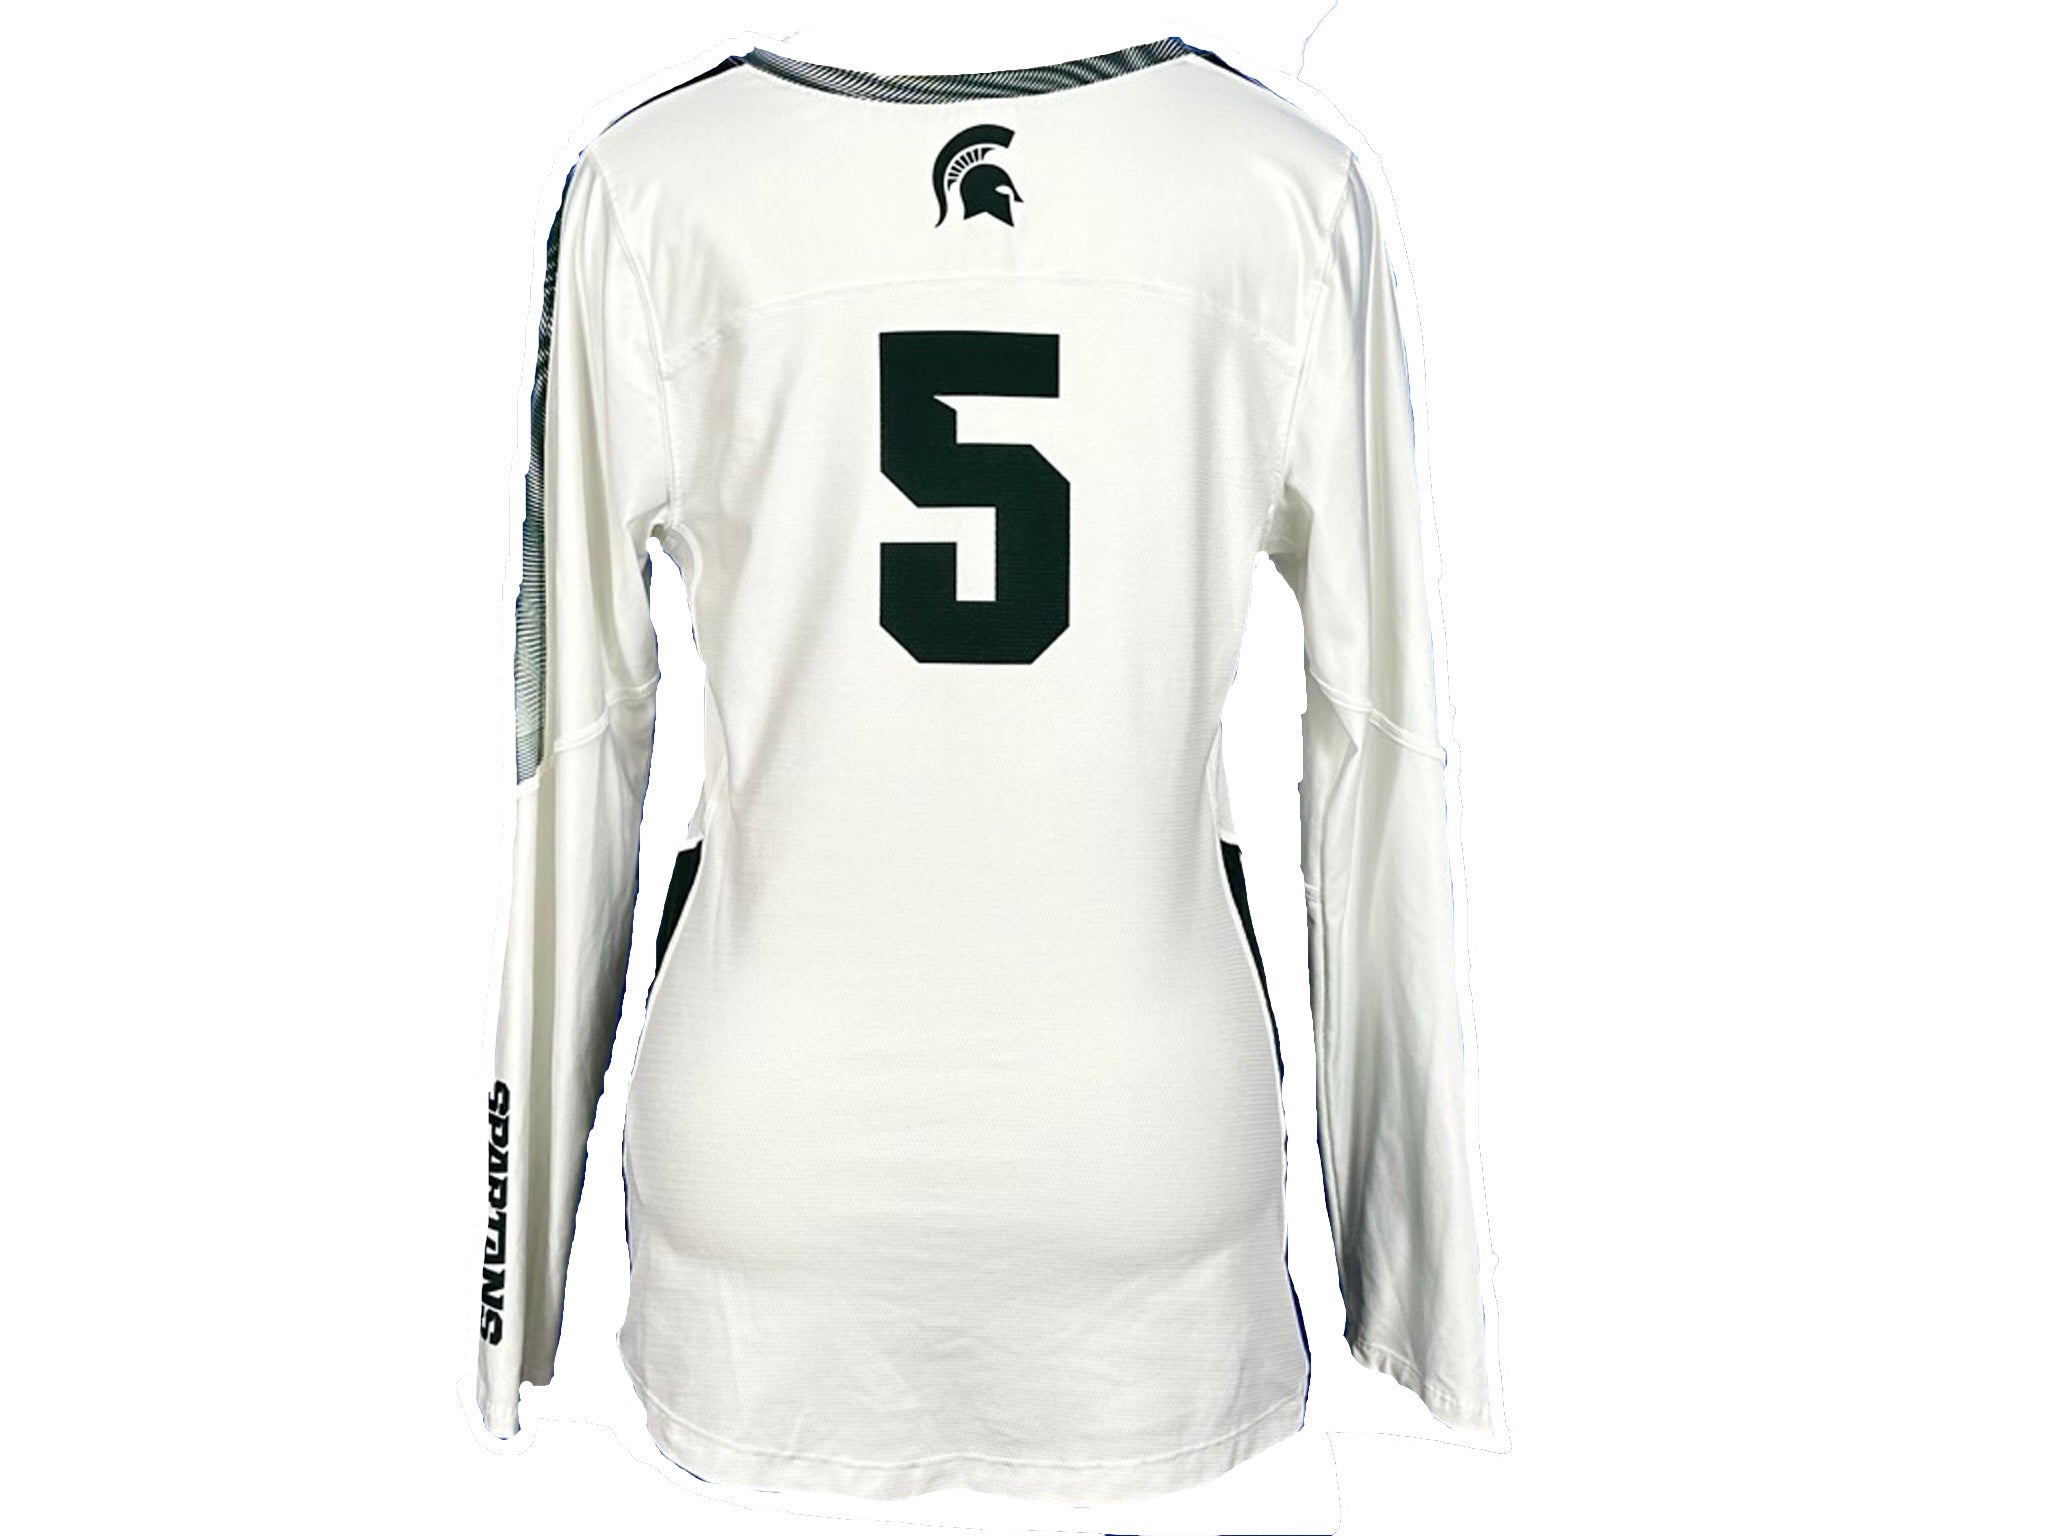 Nike White 2018-2021 Long Sleeve Volleyball Jersey #5 w/ Patch Women's Size M